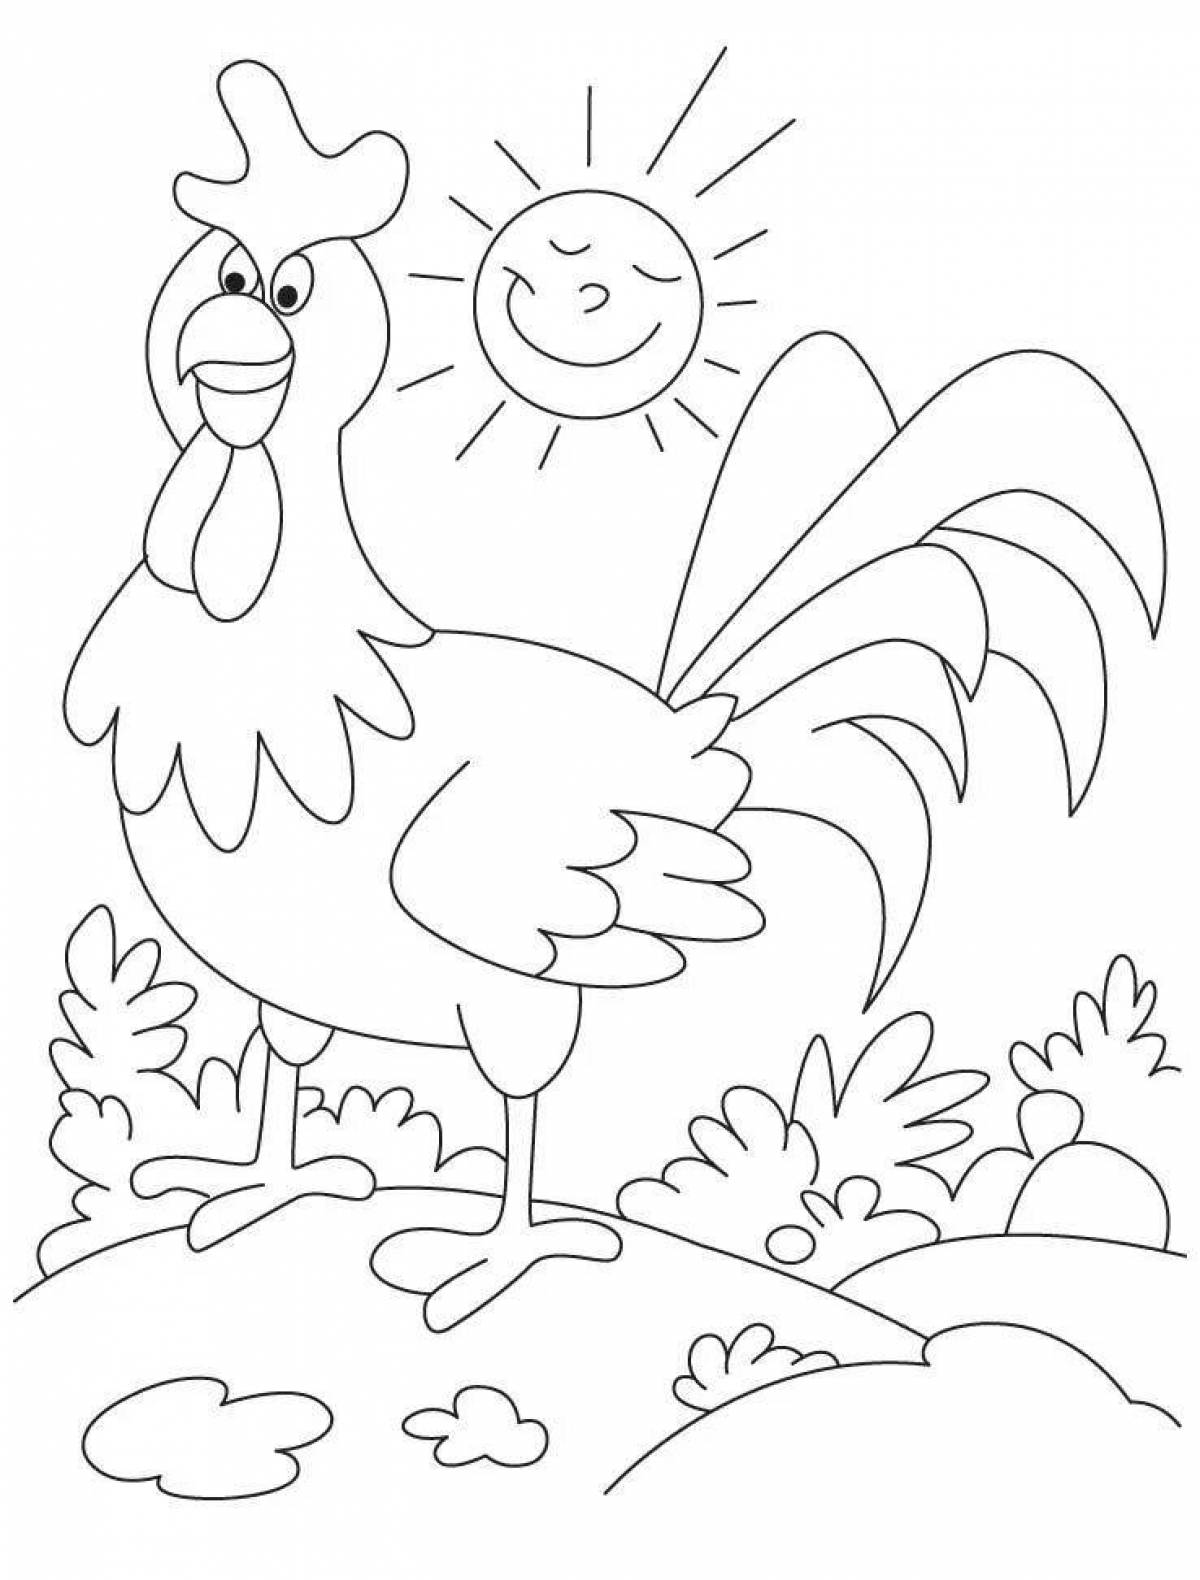 Glittering rooster coloring page for kids